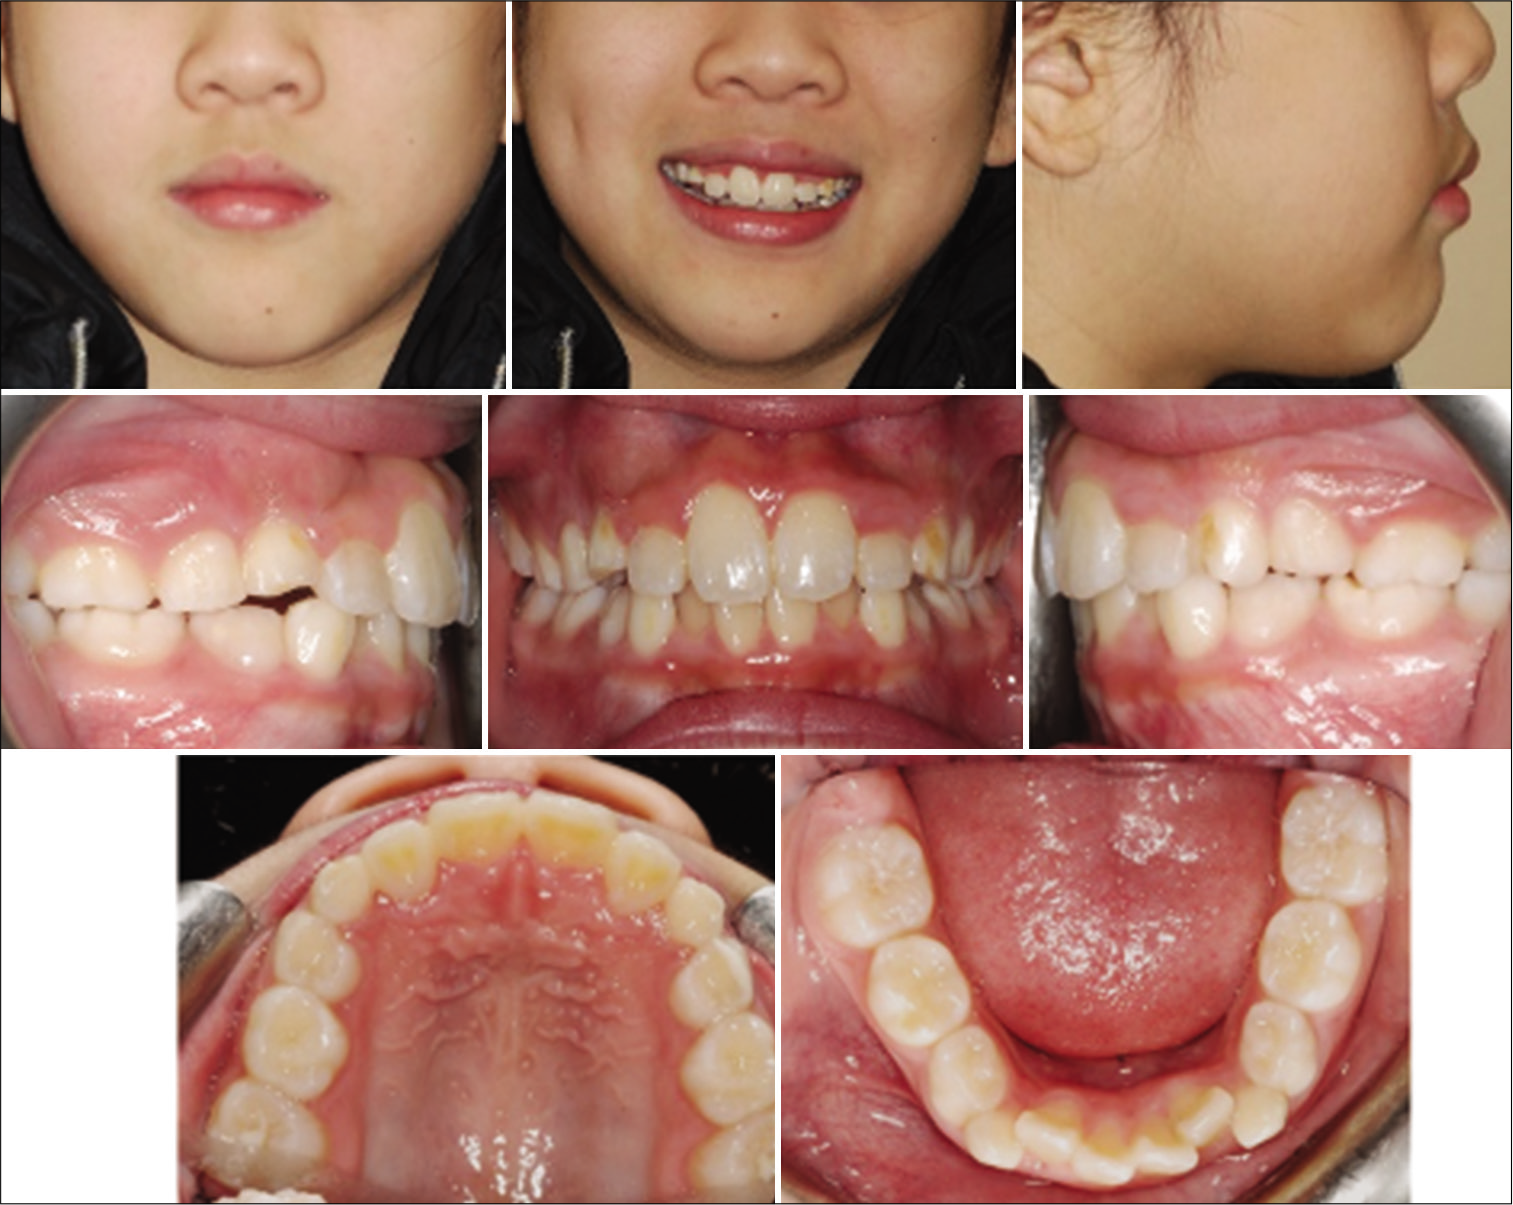 Case 2 post-treatment facial and intraoral photographs.